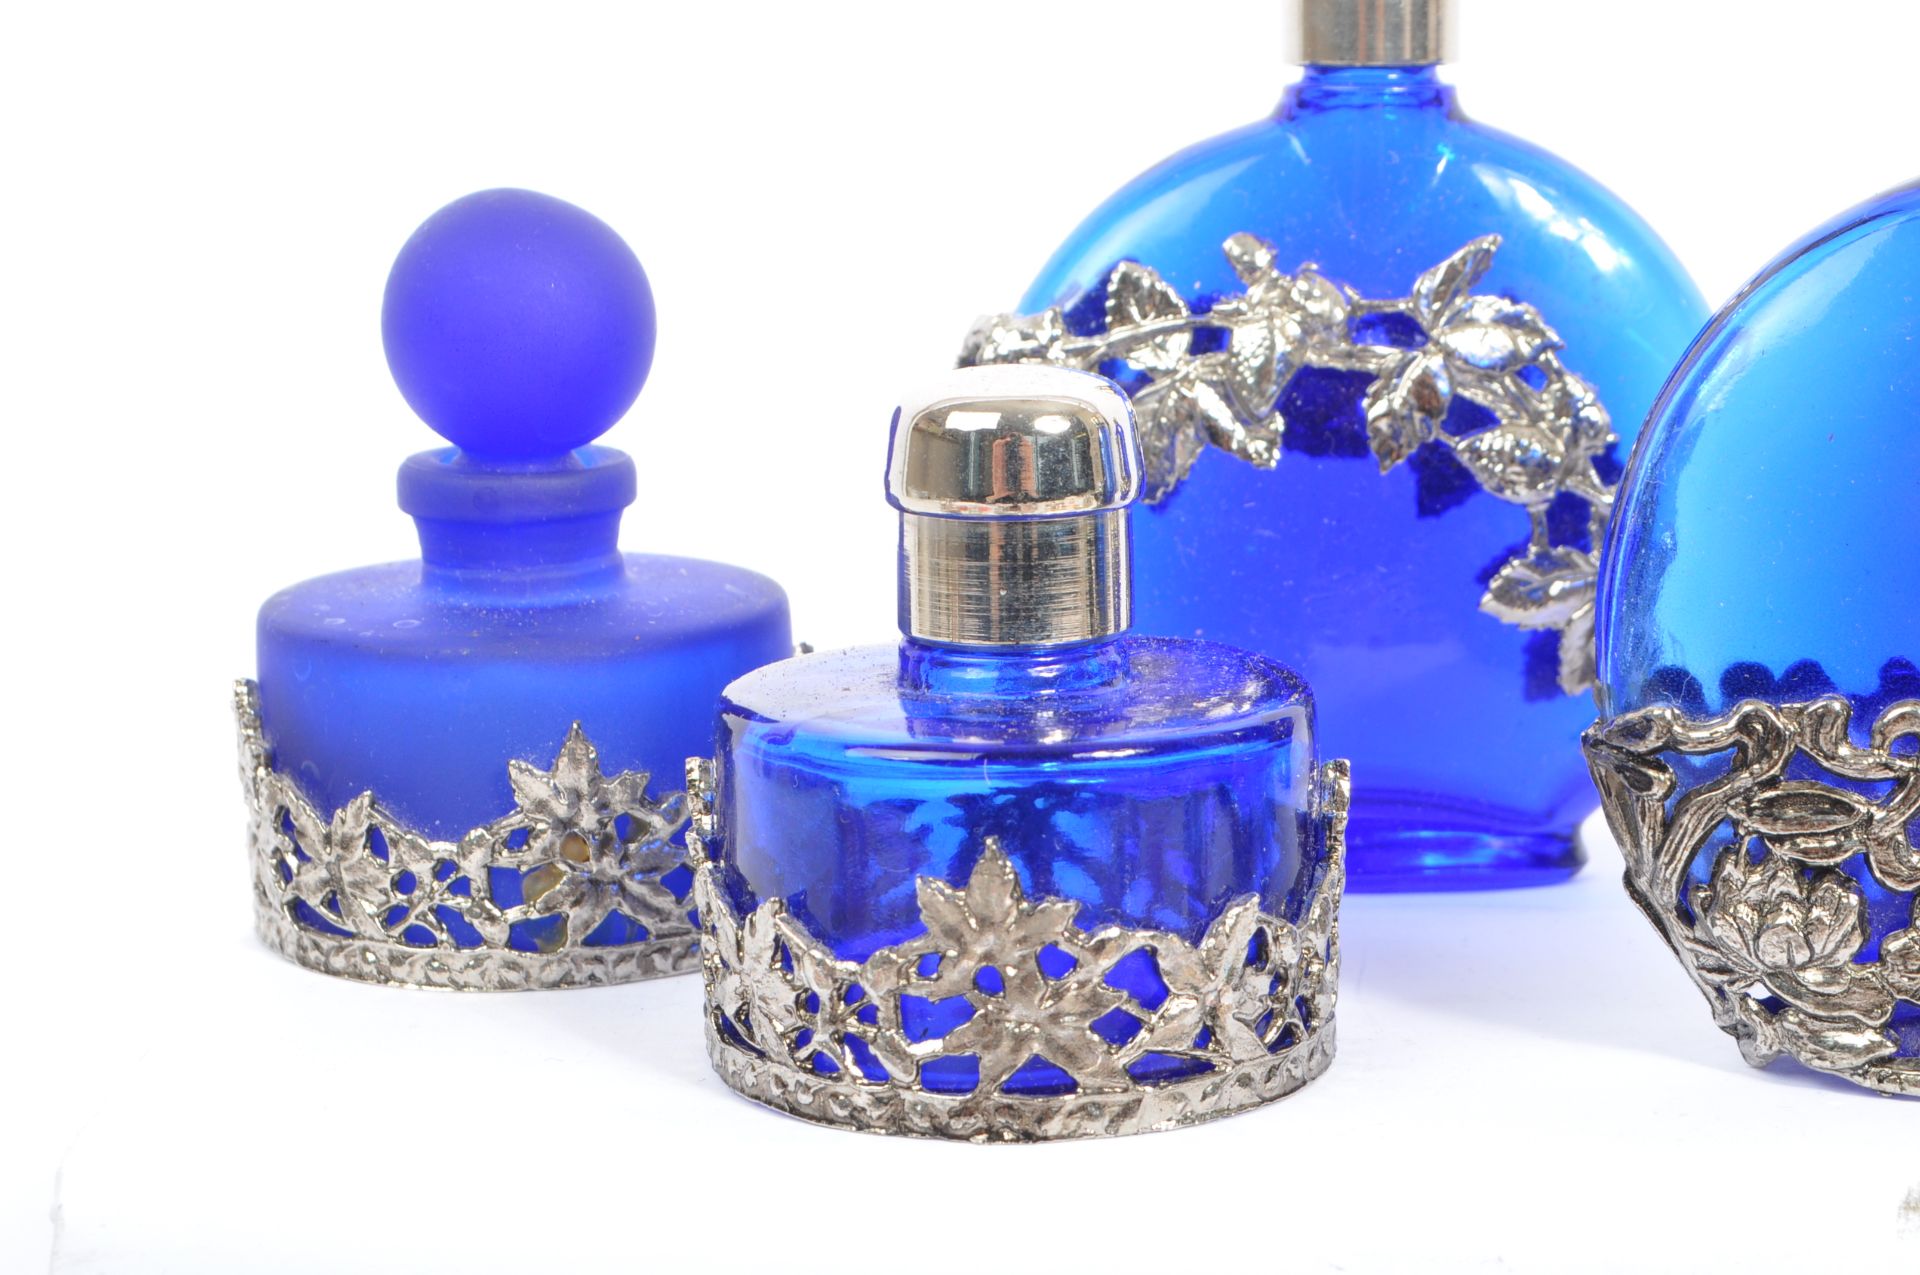 COLLECTION OF PERFUME FRAGRANCE BOTTLES - Image 8 of 10